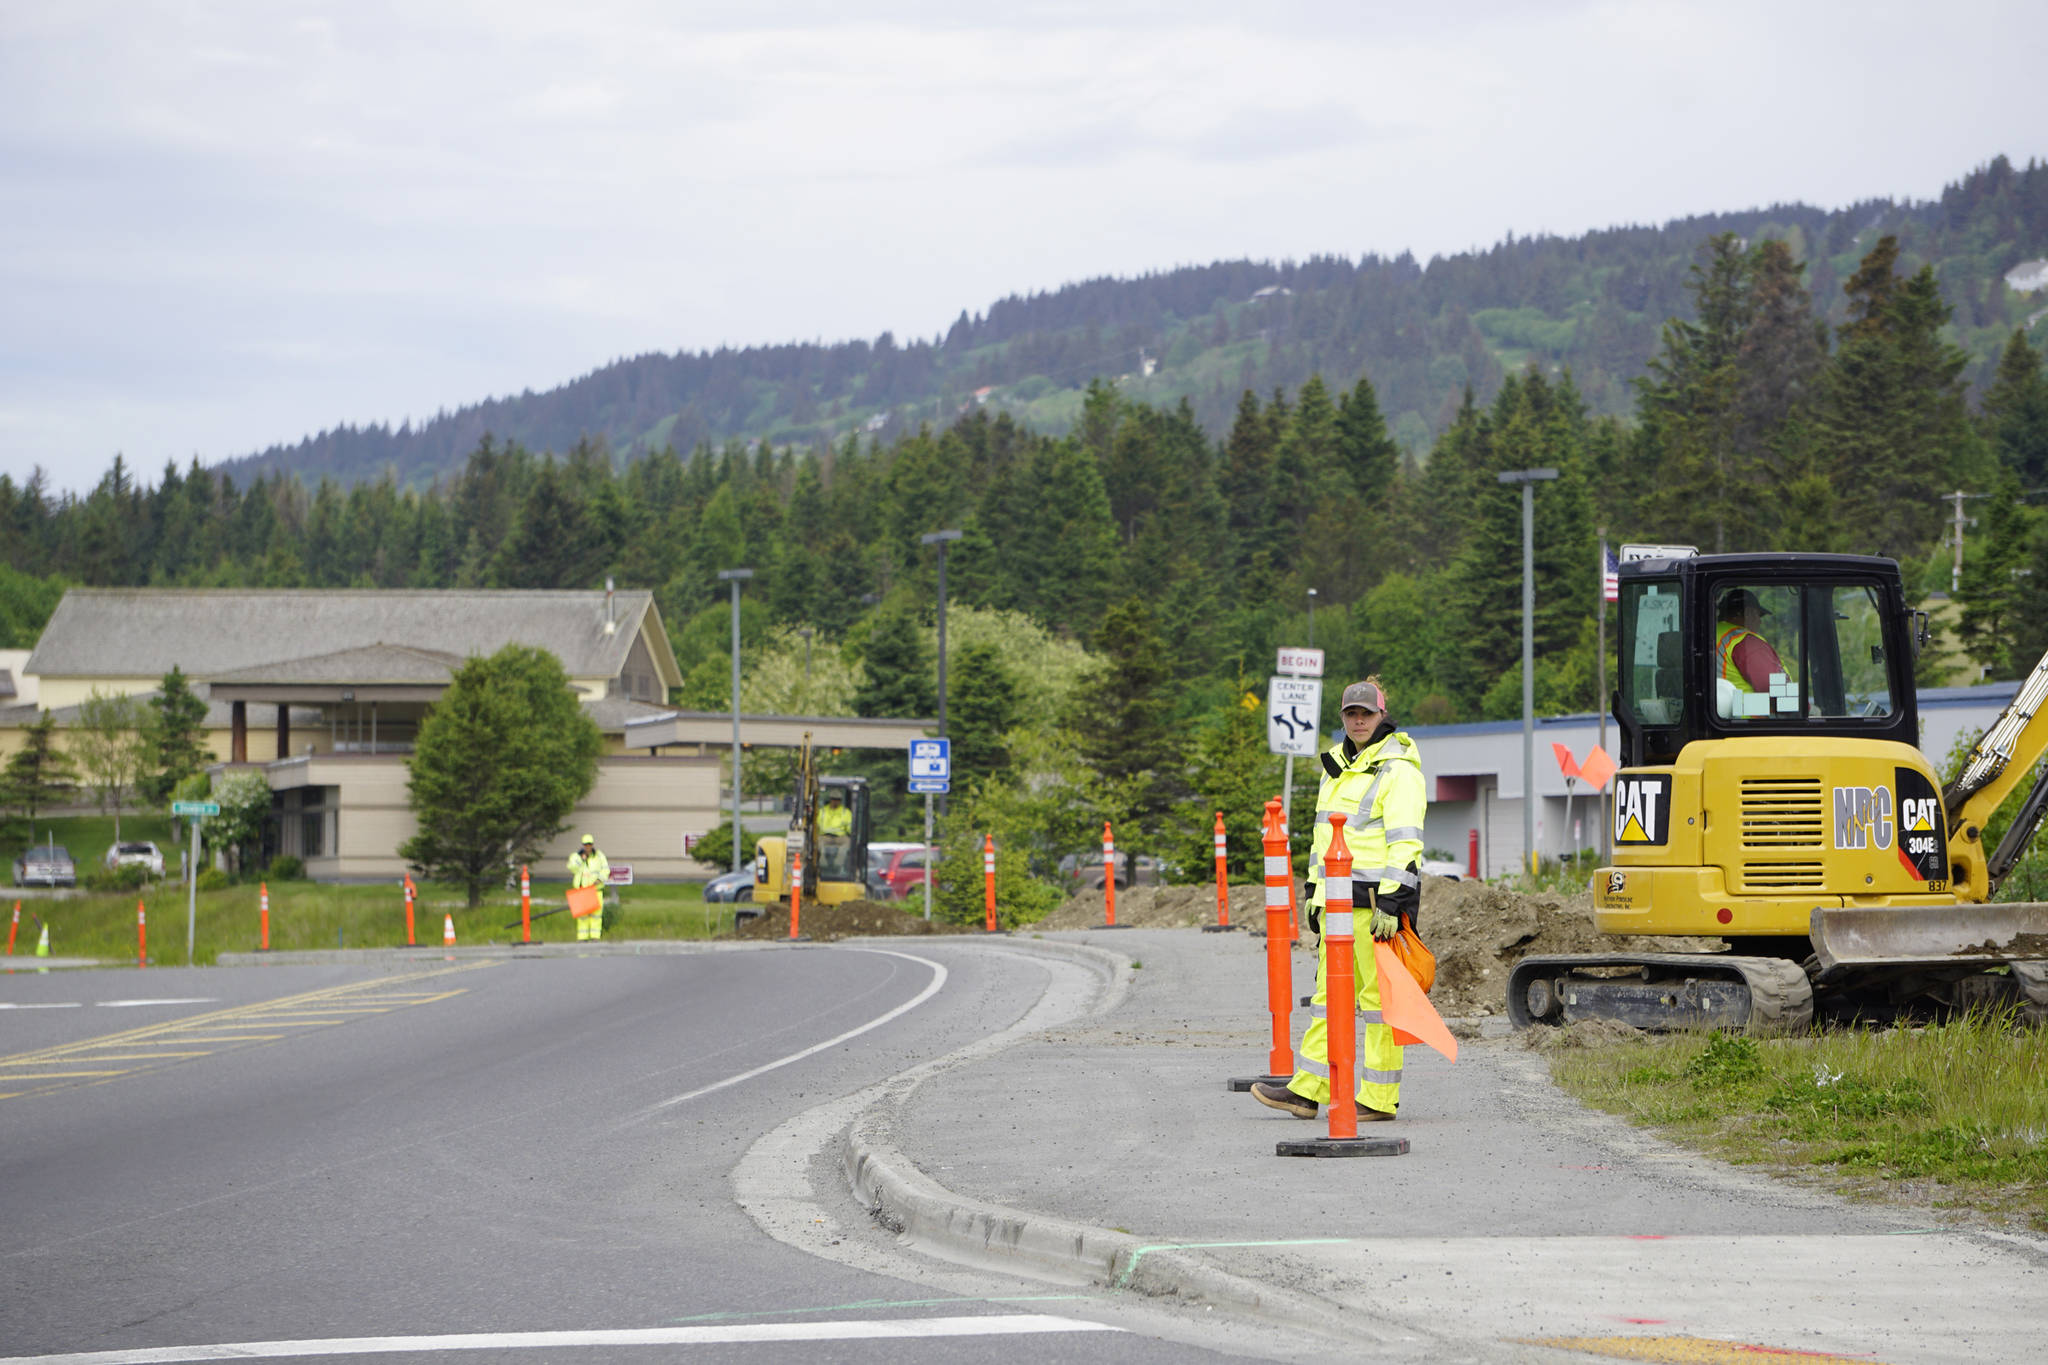 Flaggers direct traffic while workers install a fiber-optic line on the Homer Bypass to connect the Lake Street intersection traffic light with a new traffic light to be built at Main Street and the Homer Bypass on June 4, 2019 in Homer, Alaska (Photo by Michael Armstrong/Homer News)